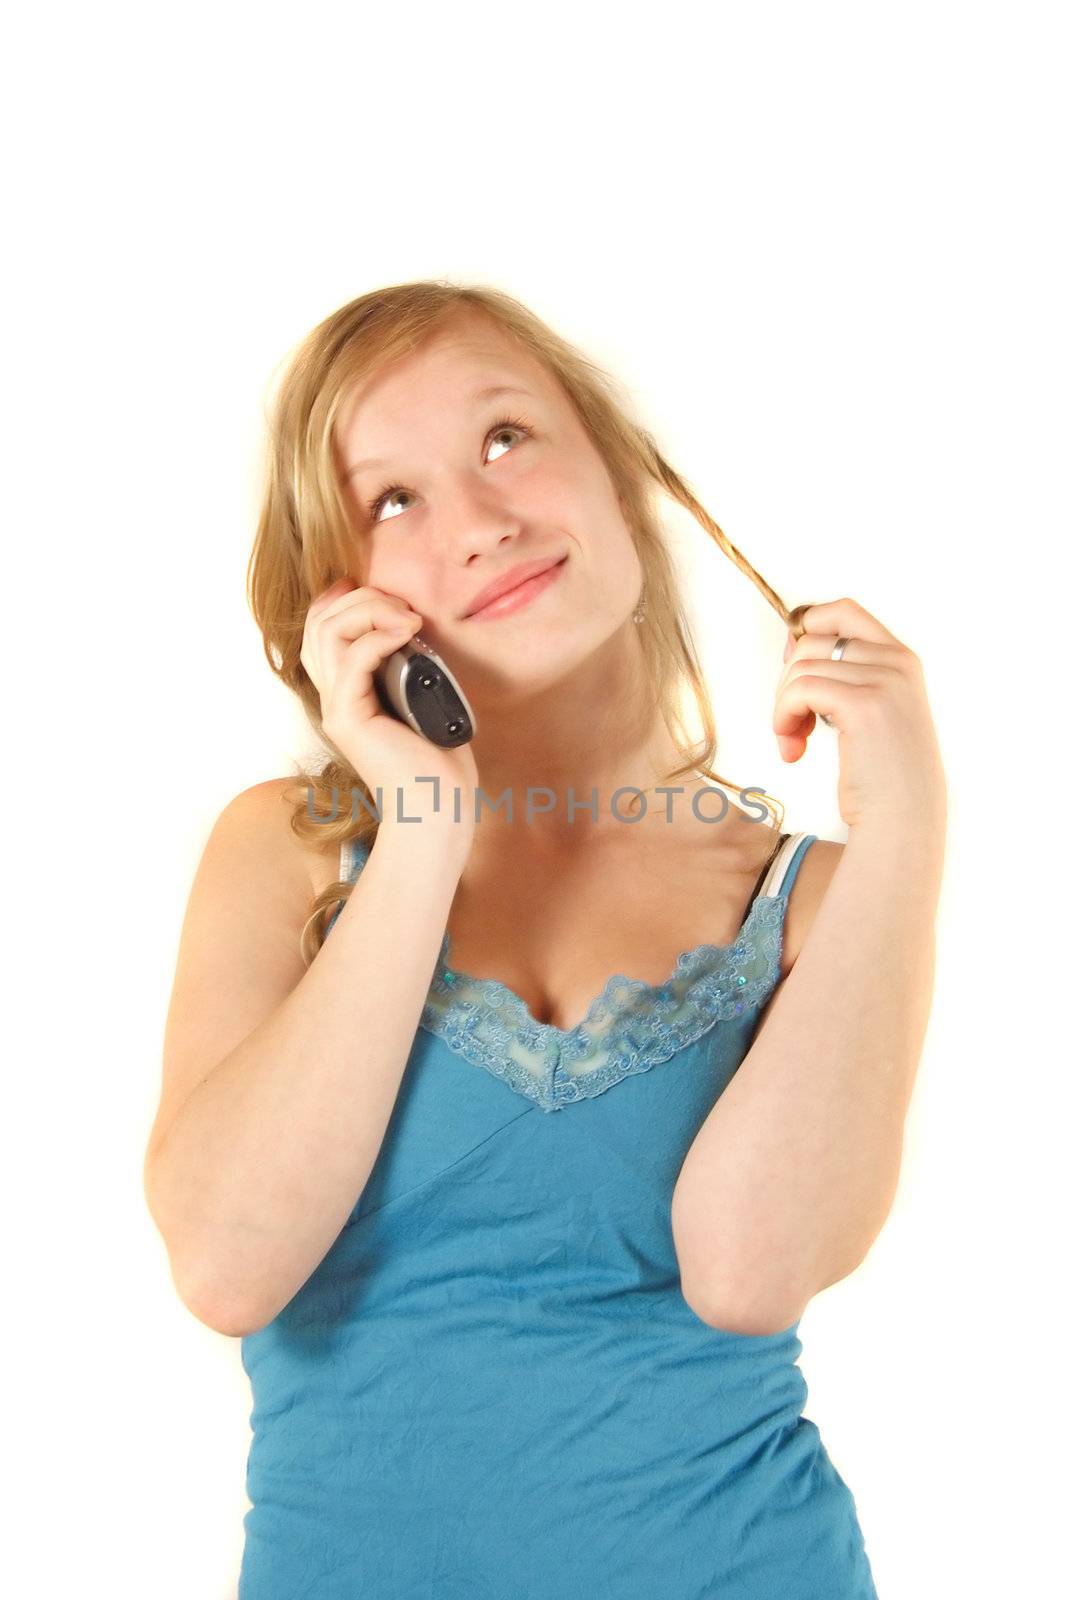 A young handsomewoman gets a positive call. All isolated on white background.